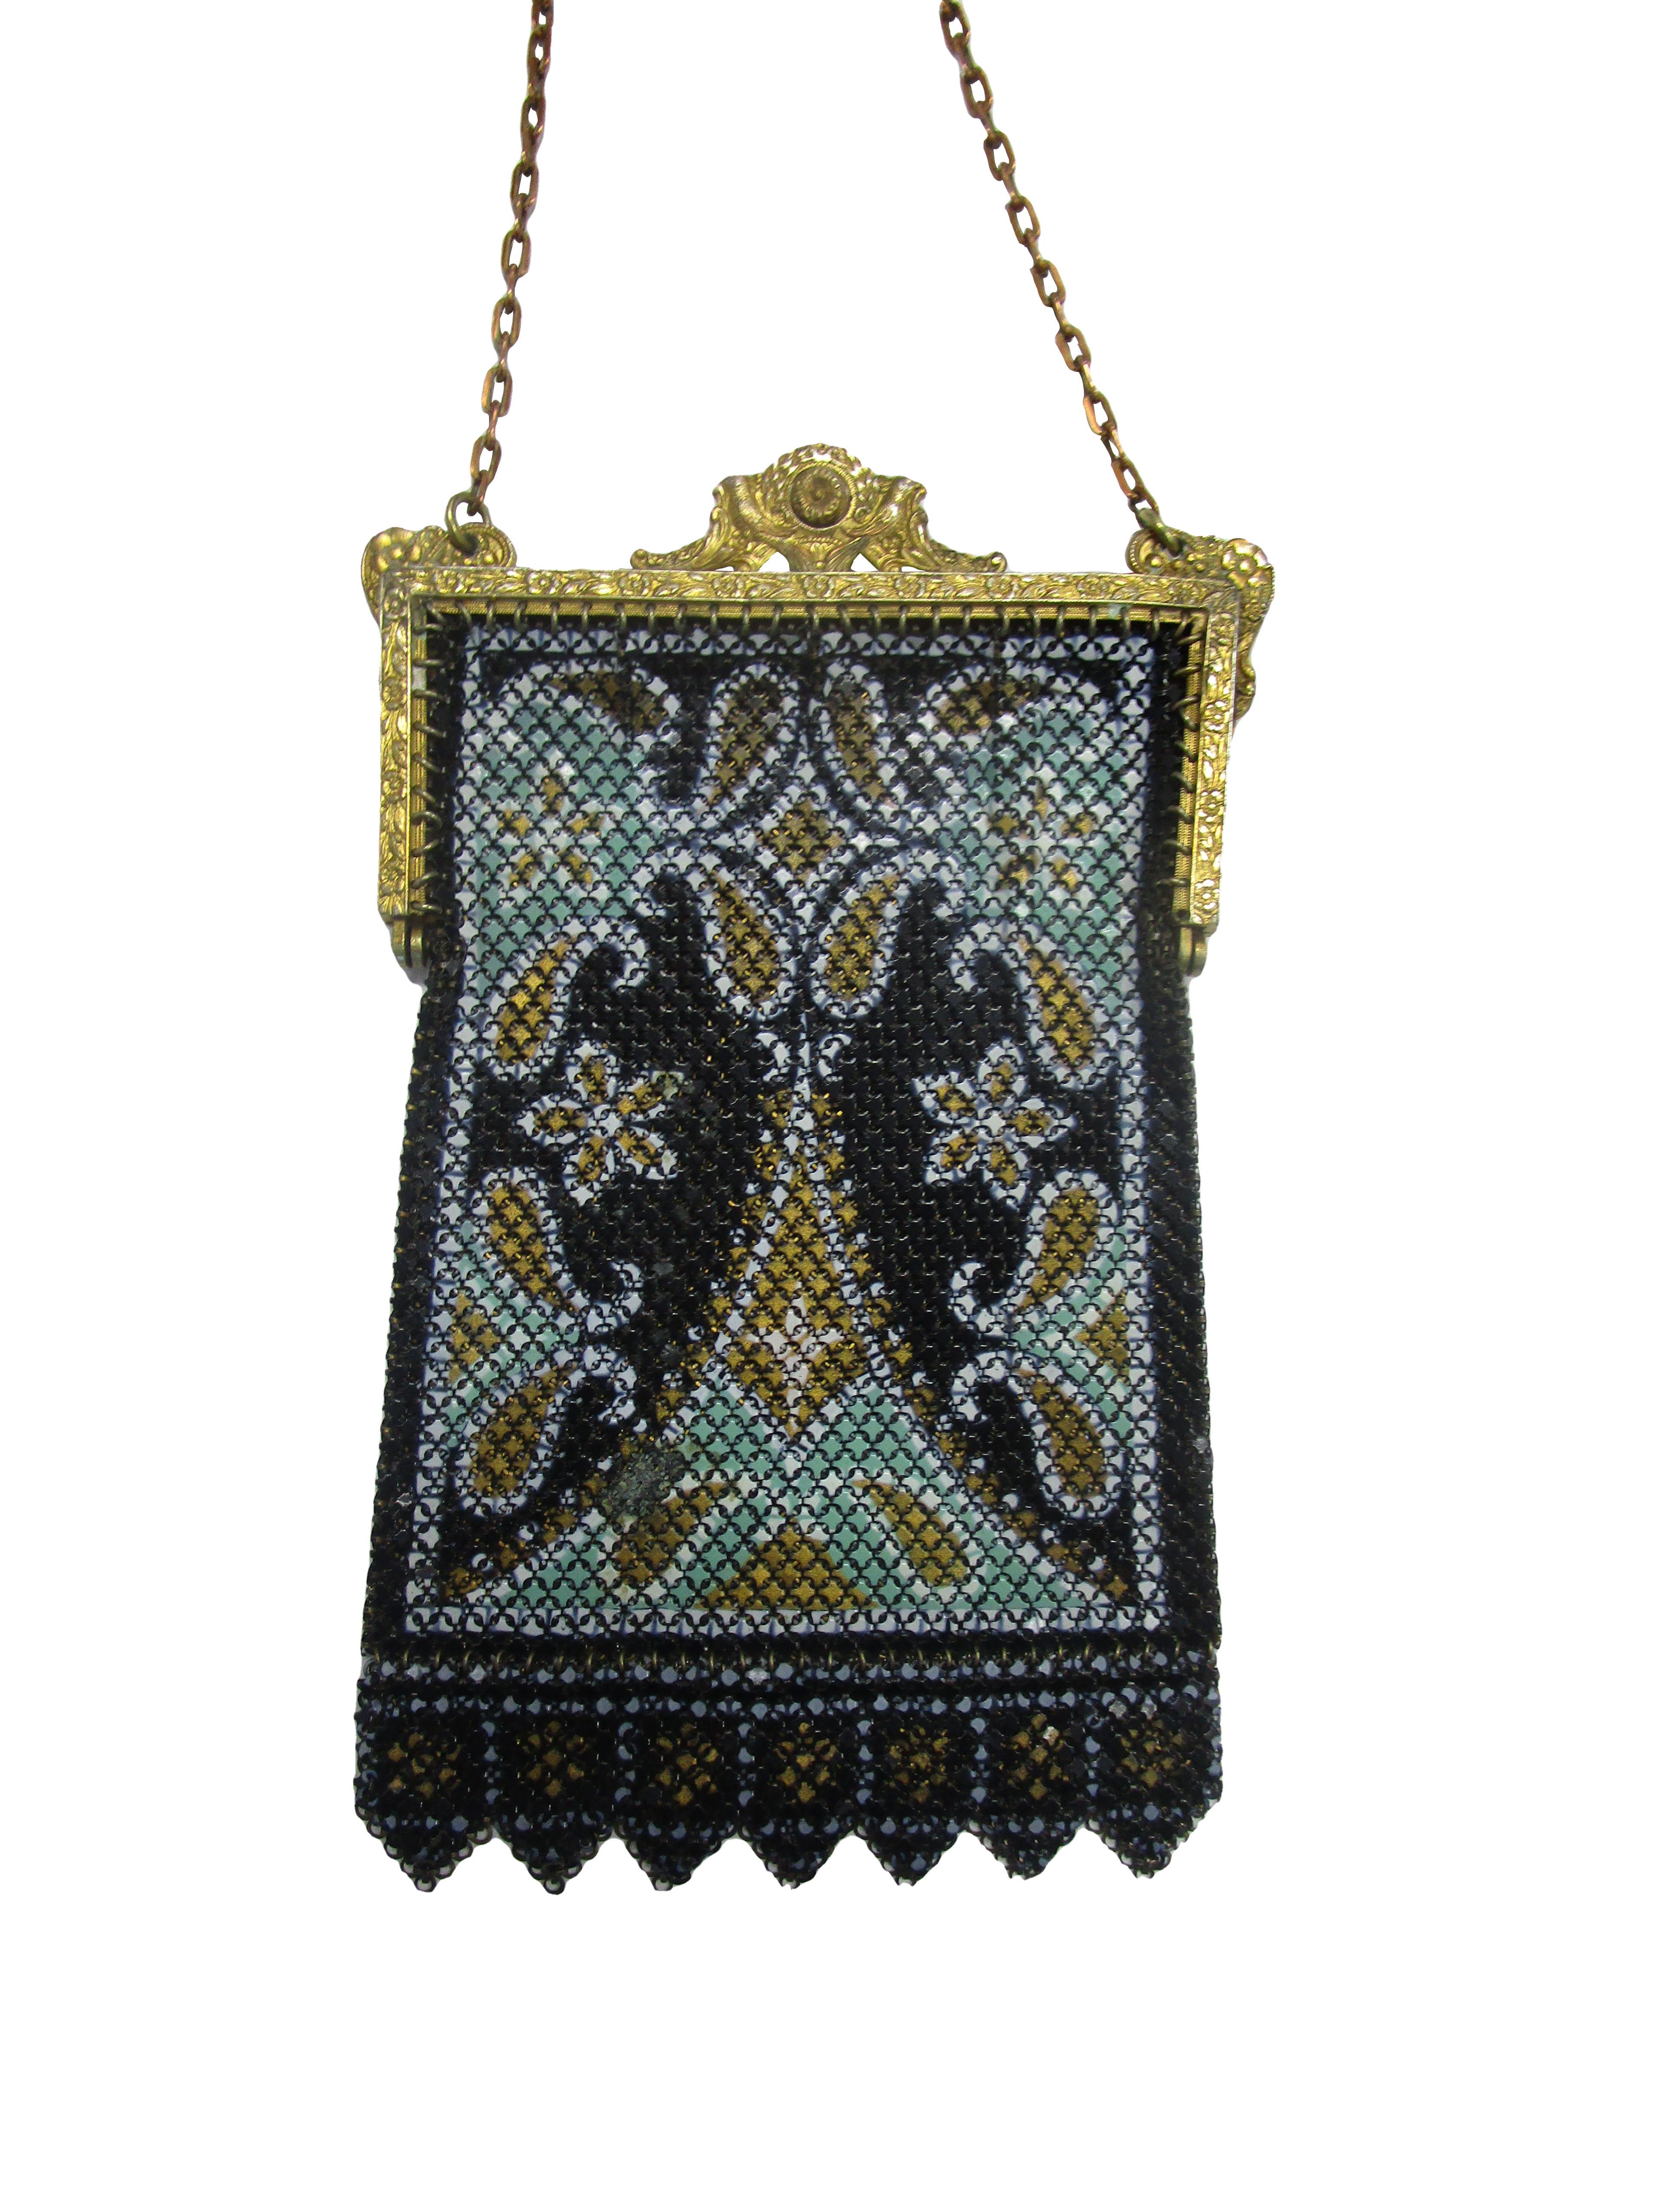 
This lovely antique mesh bag from the Mandalian Mfg features a decorative top clasp with floral motifs. The black, gold and mint design on the body of the bag resembles traditional middle eastern style rugs. There is slight aging on the lower left